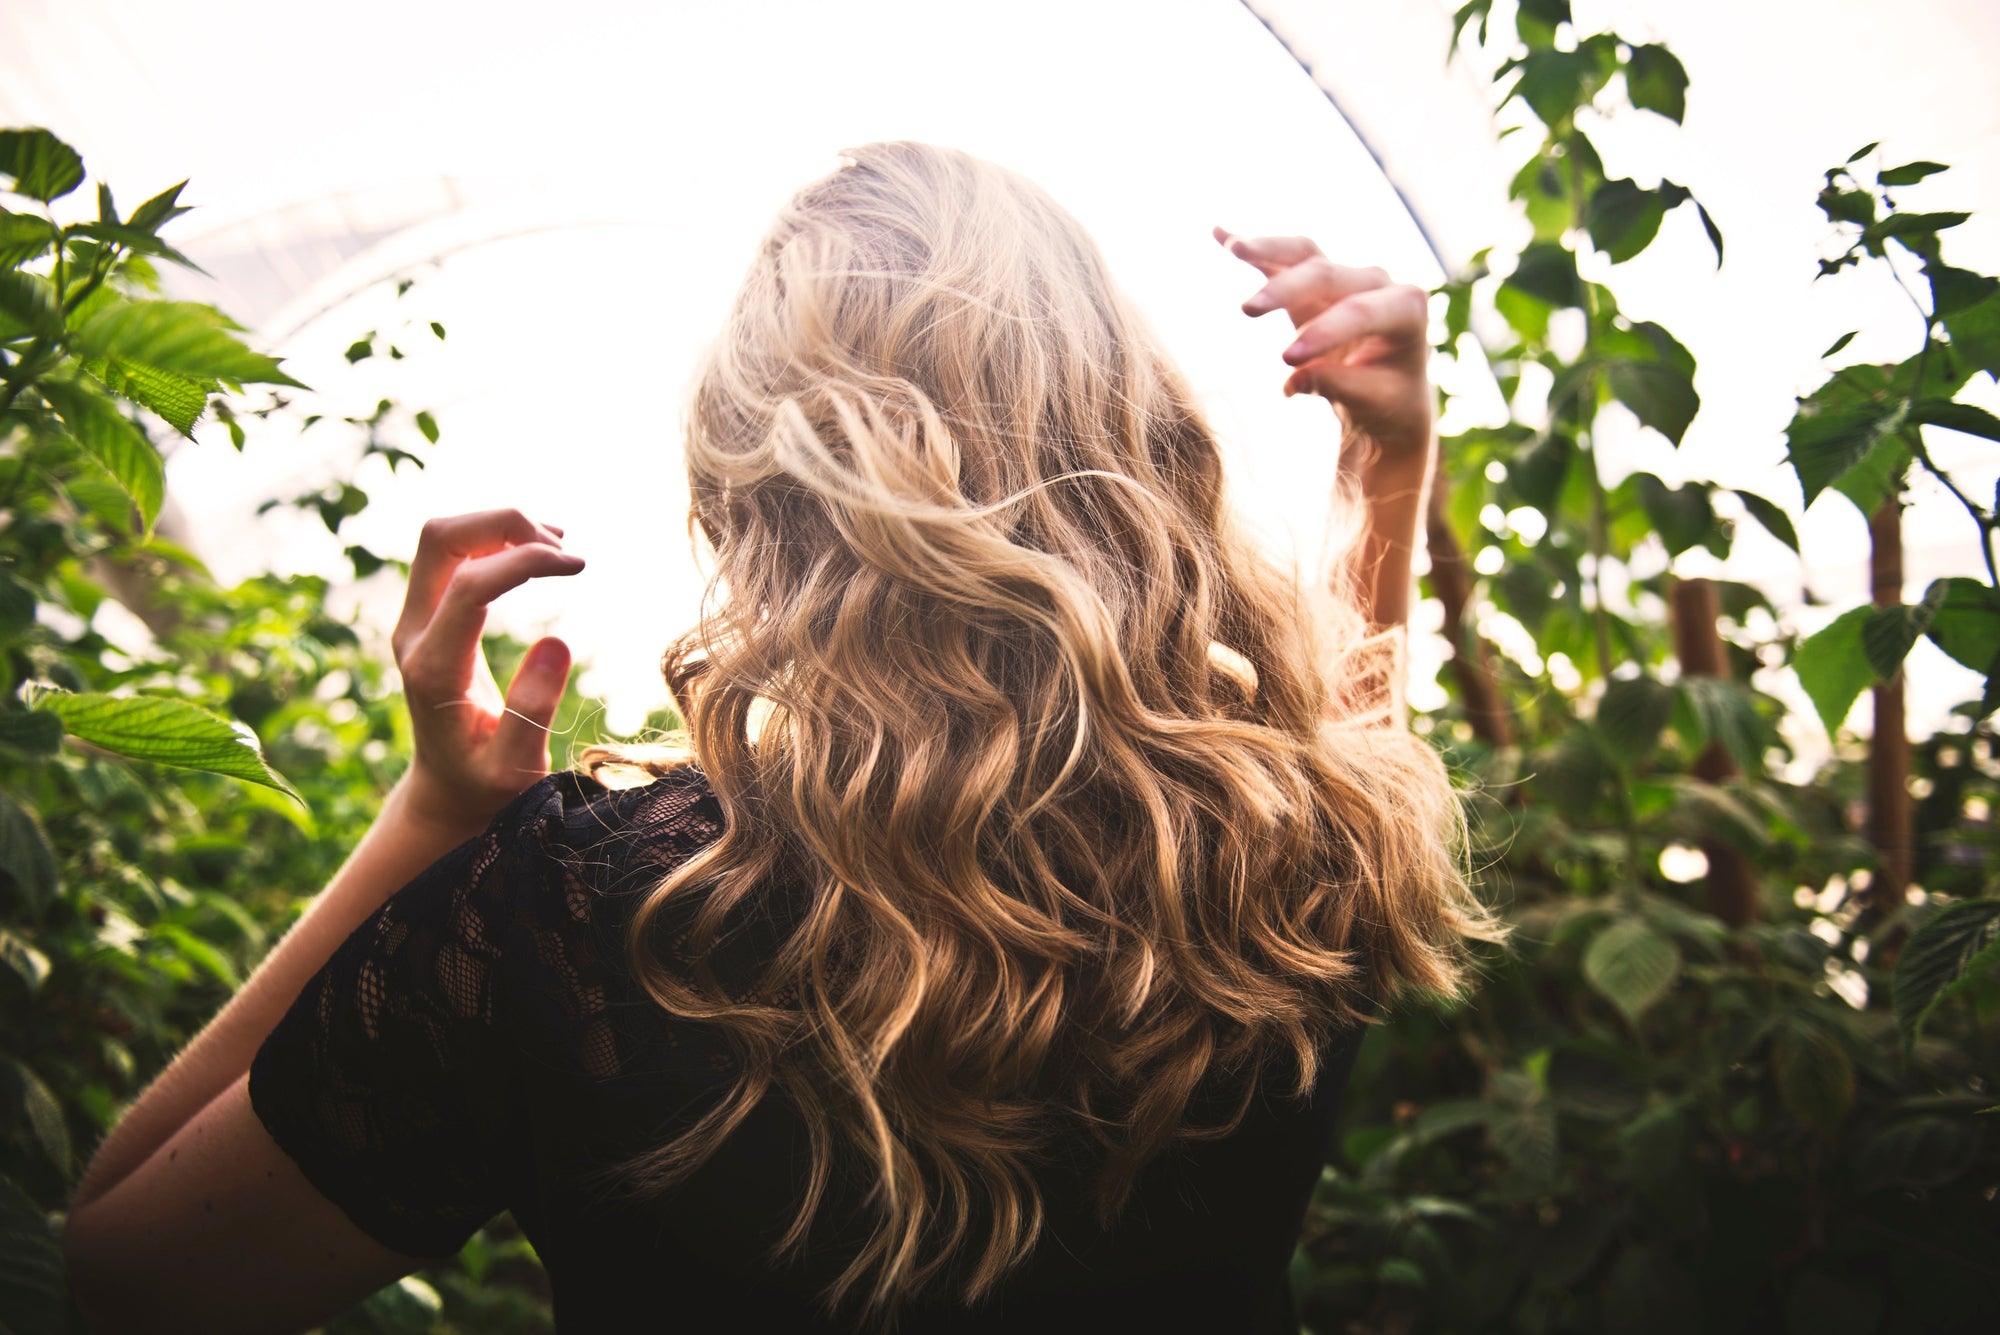 Sun Protection for Hair: The Importance of Using SPF Hair Products